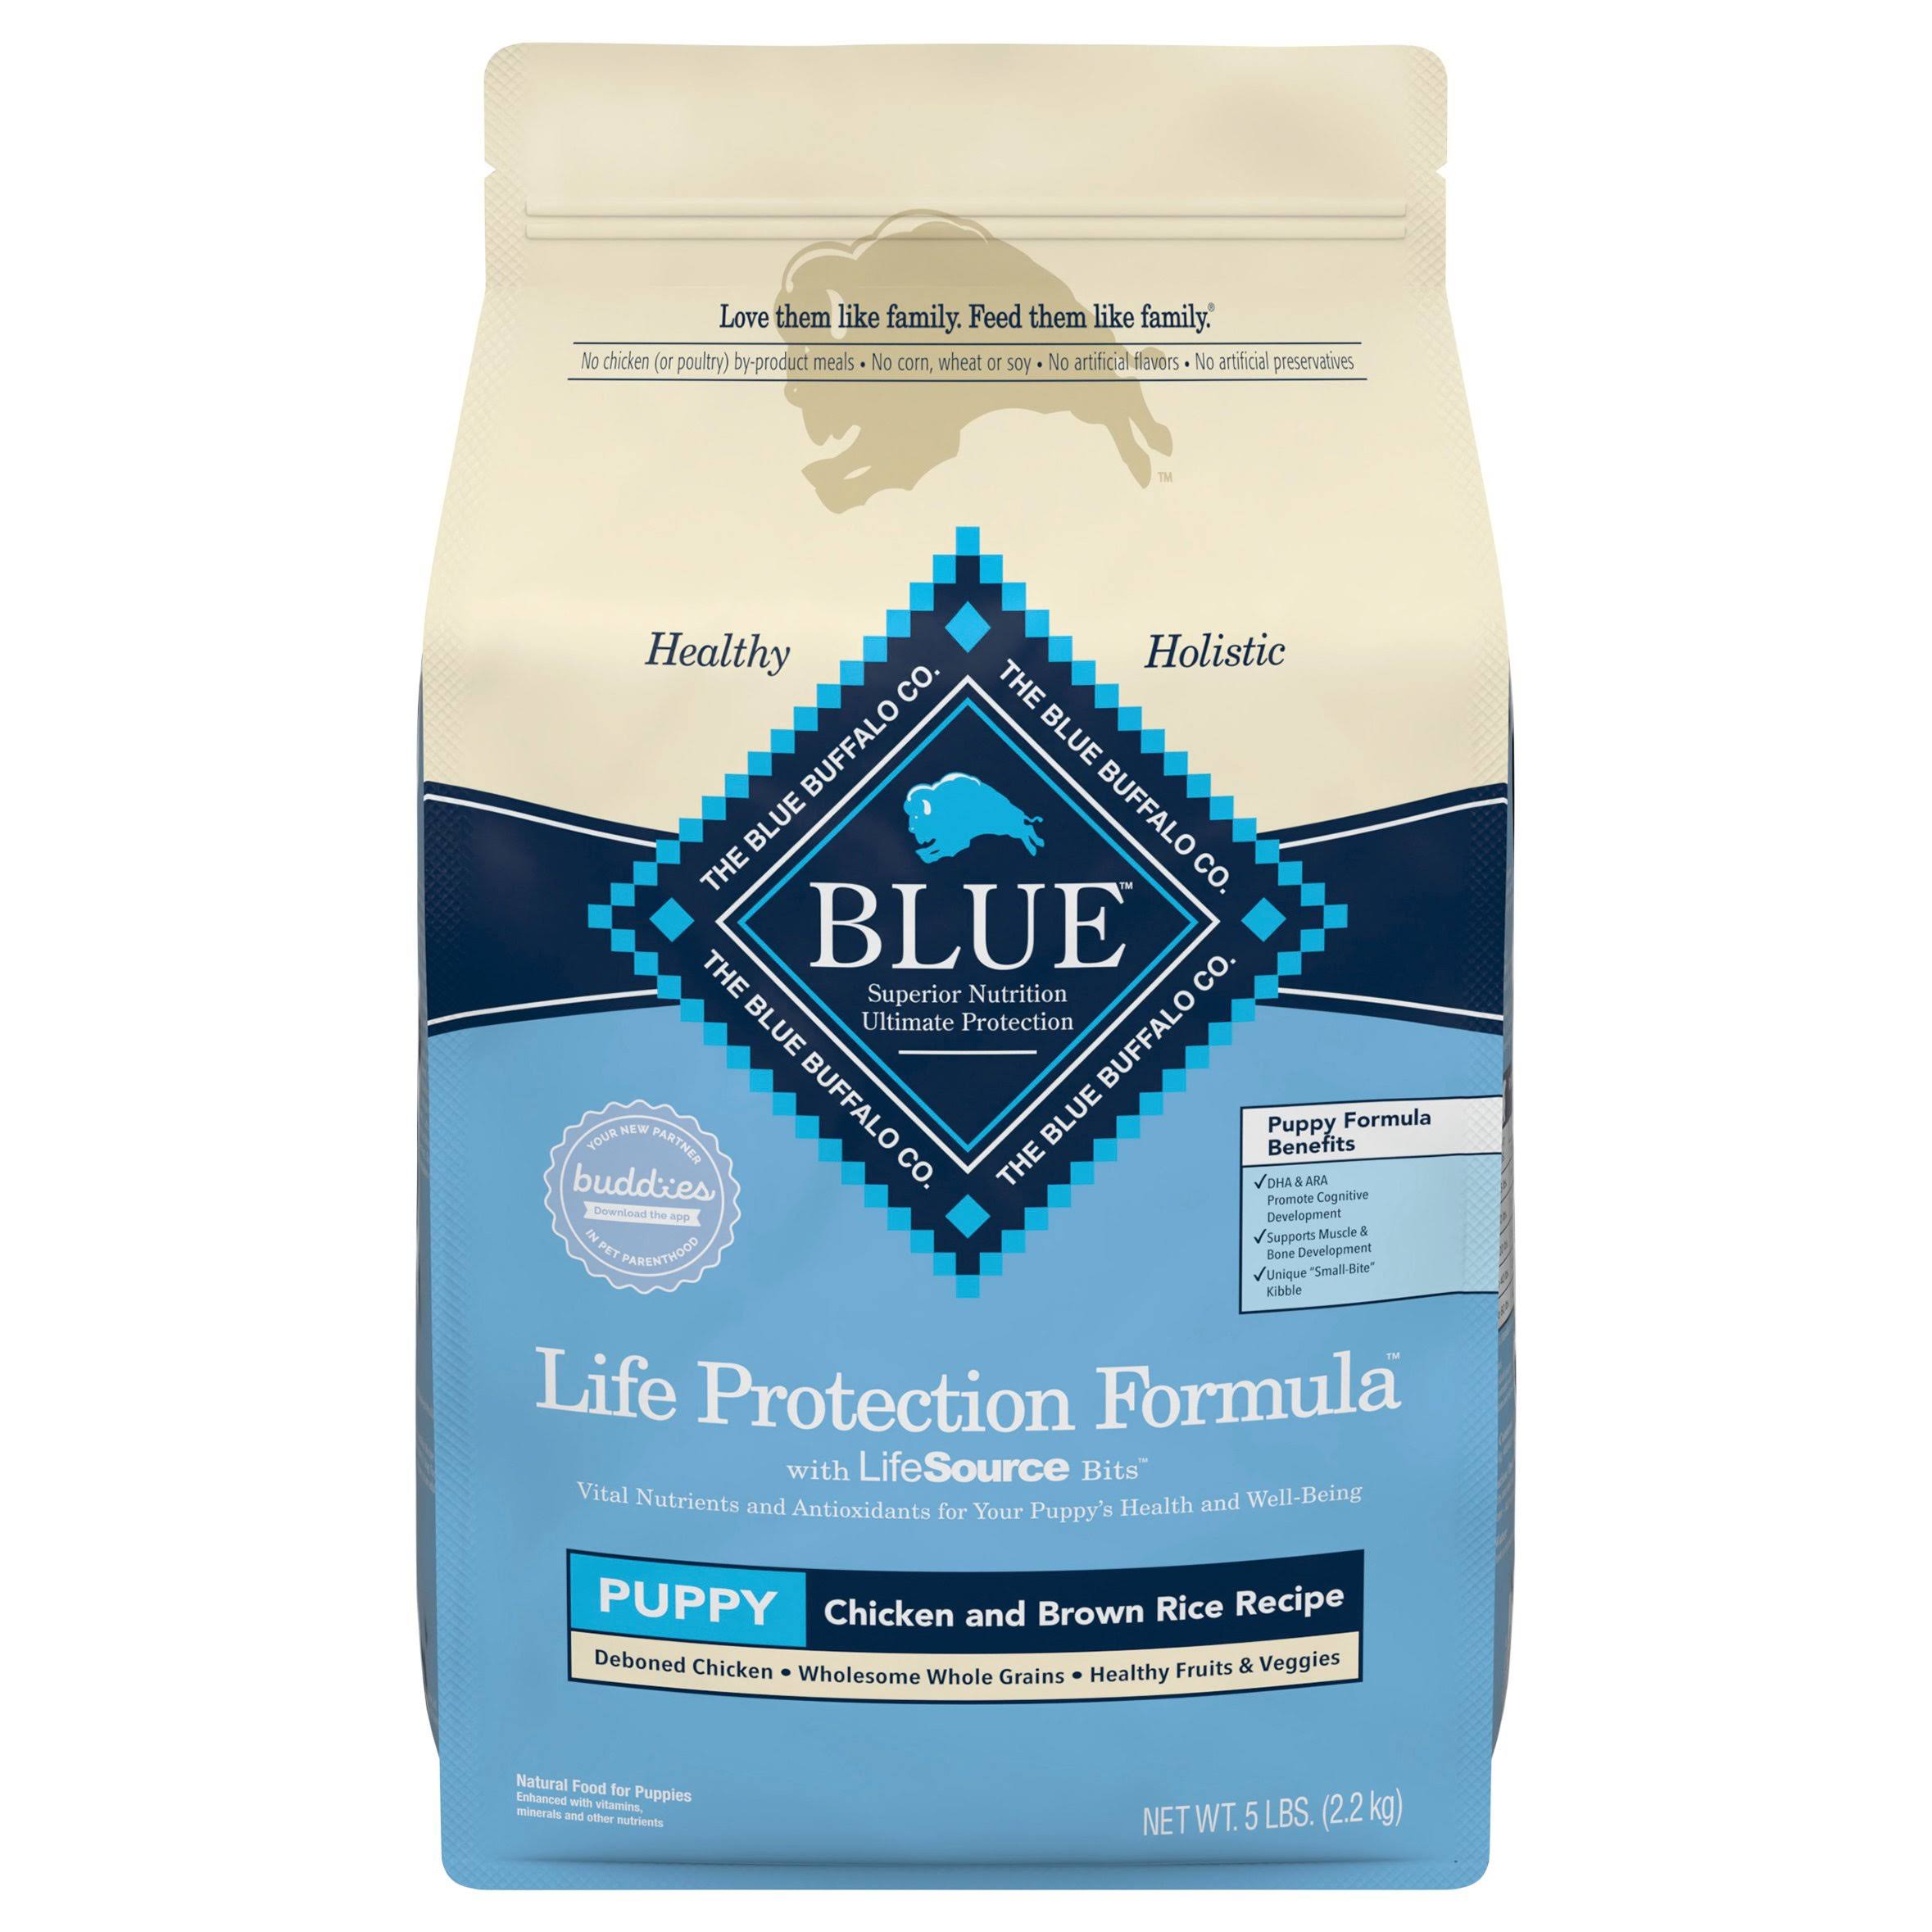 Blue Buffalo Dog Food, Chicken and Brown Rice Recipe, Puppy - 5 lbs (2.2 kg)